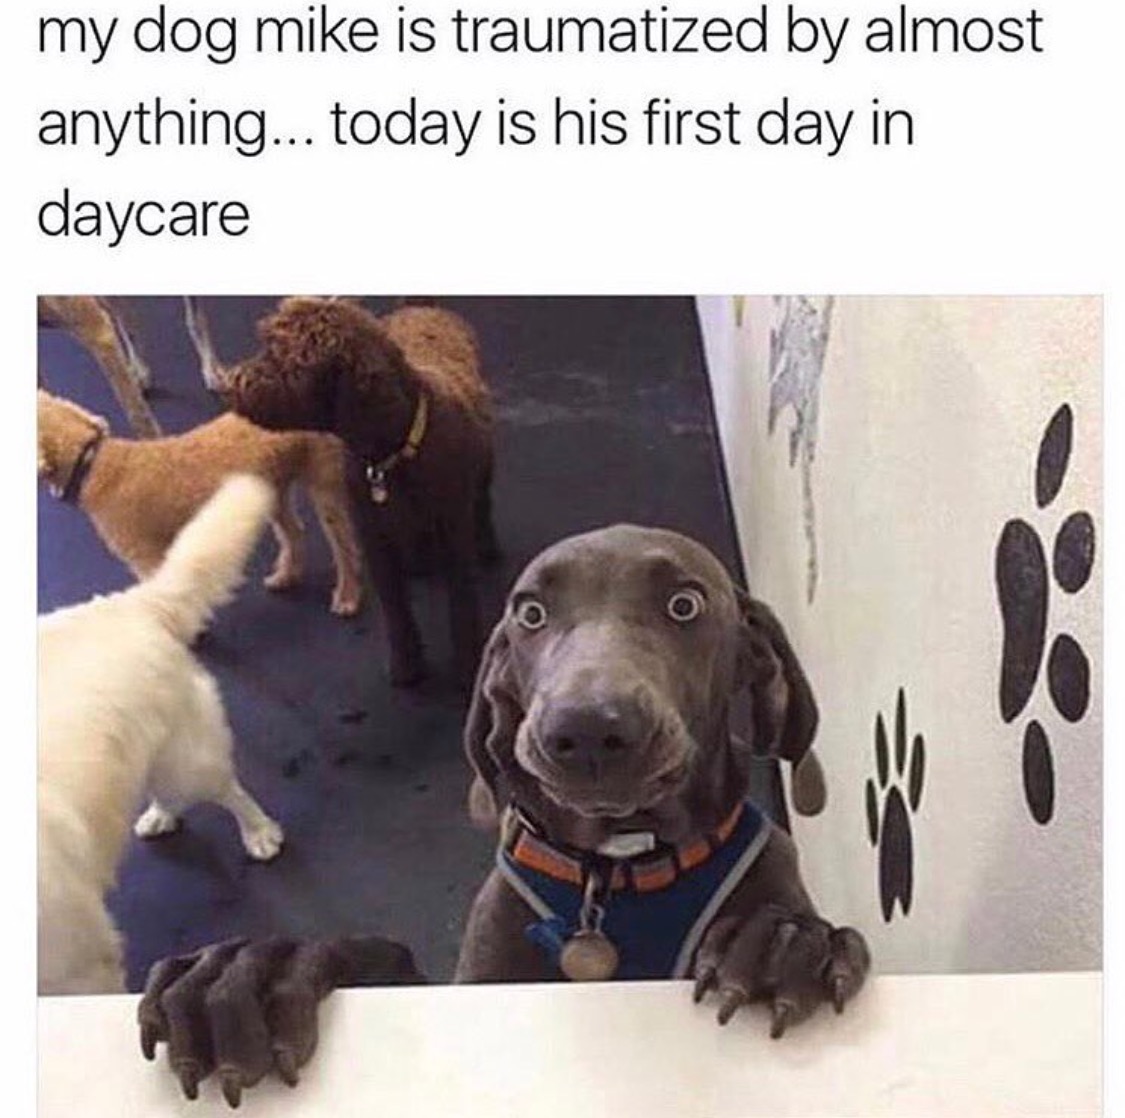 Overly traumatized dog at his first day of daycare.